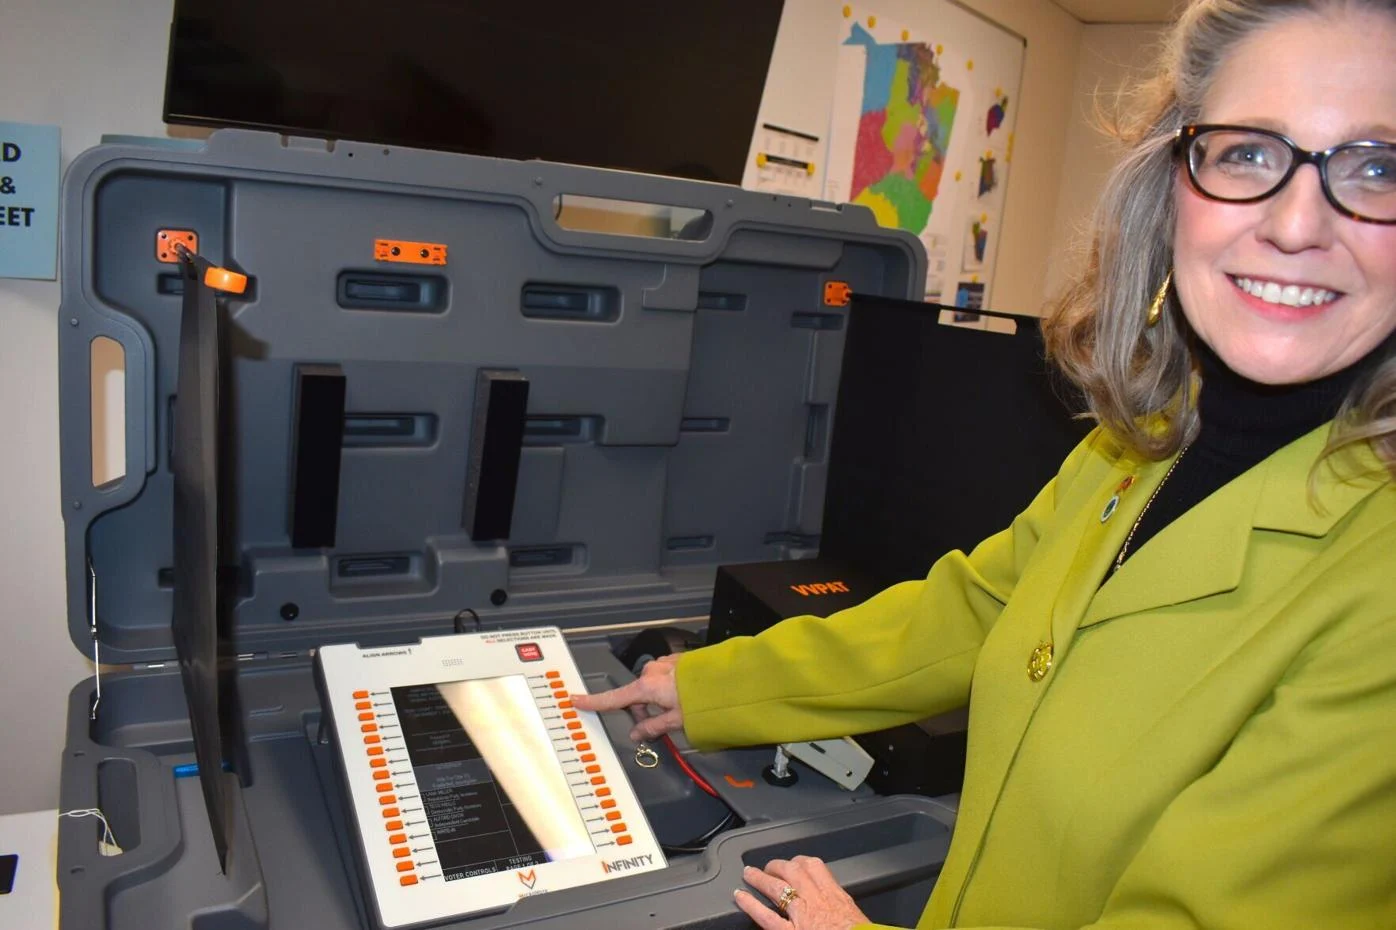 White woman wearing glasses and green blazer shows push buttons on white voting machine in gray case